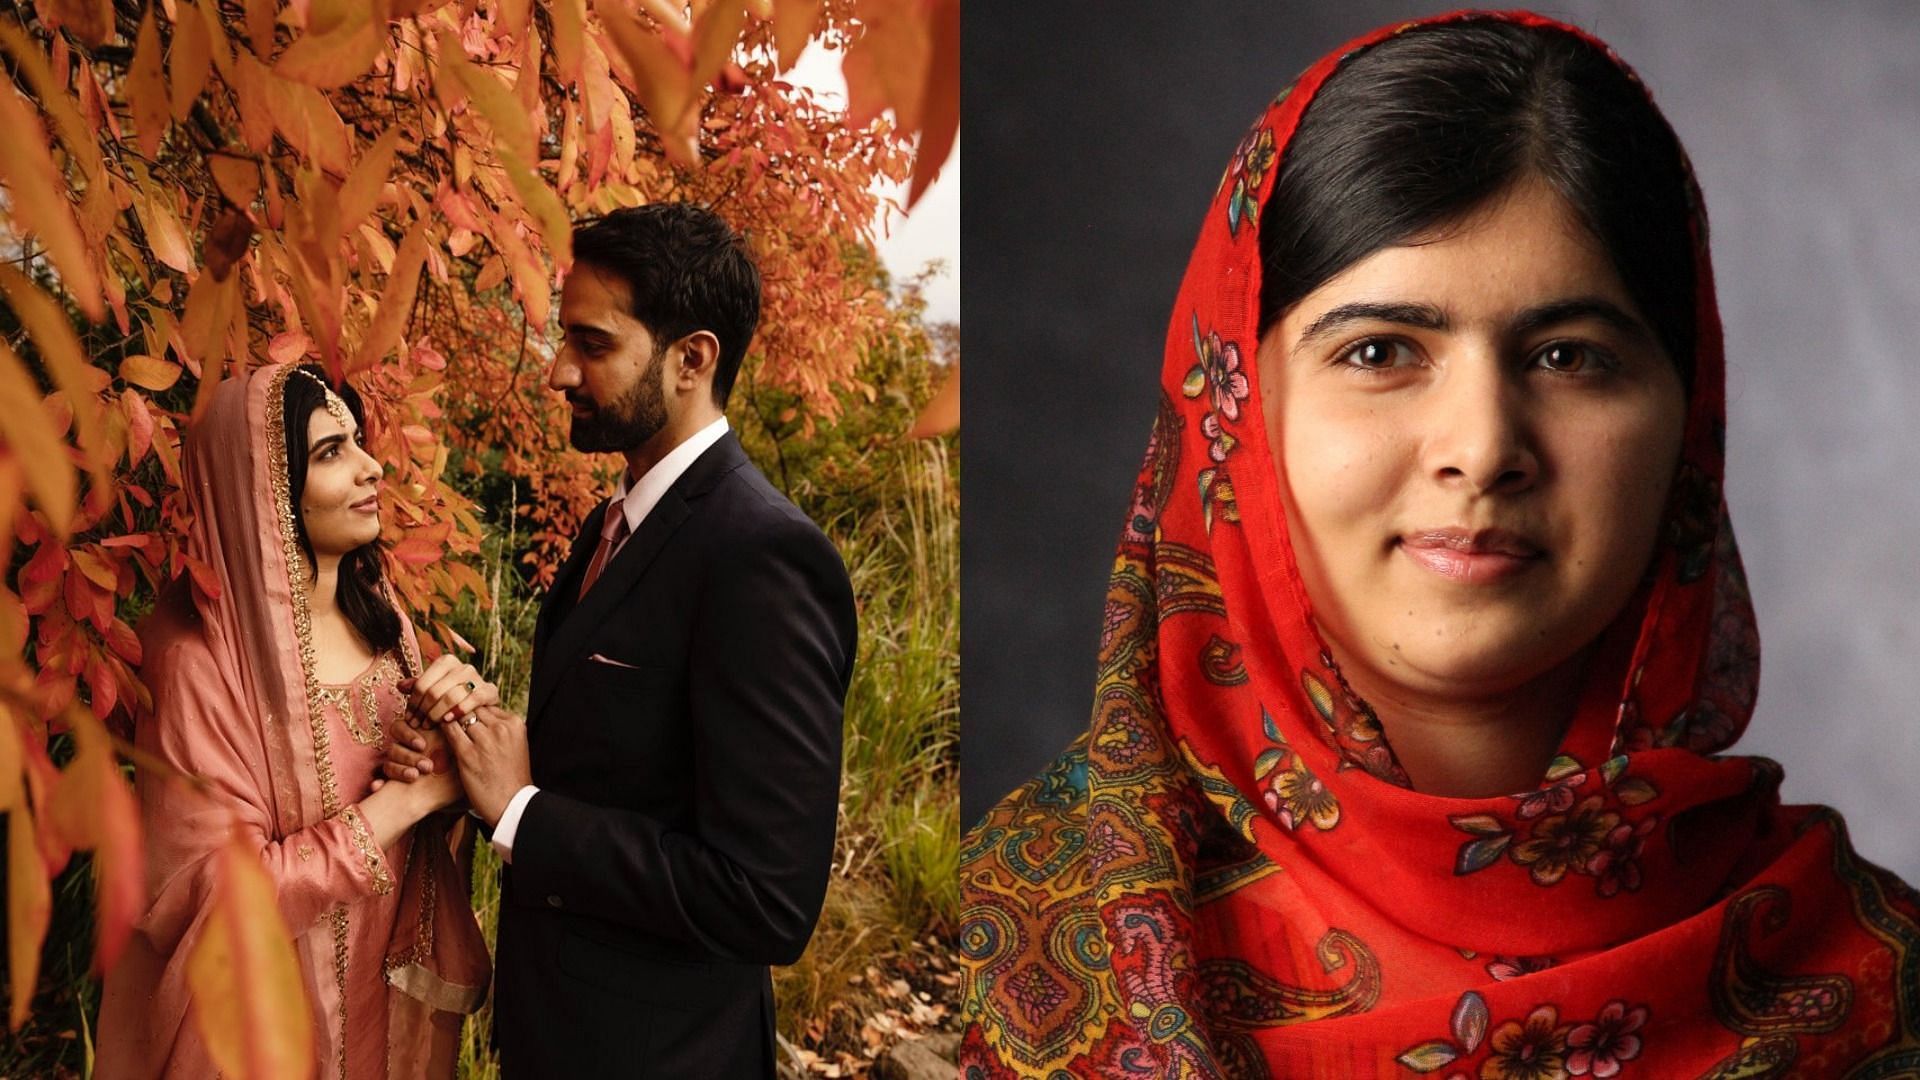 Malala Yousafzai has tied the knot with Asser Malik in Birmingham (Image via Malala/Instagram and Getty Images)